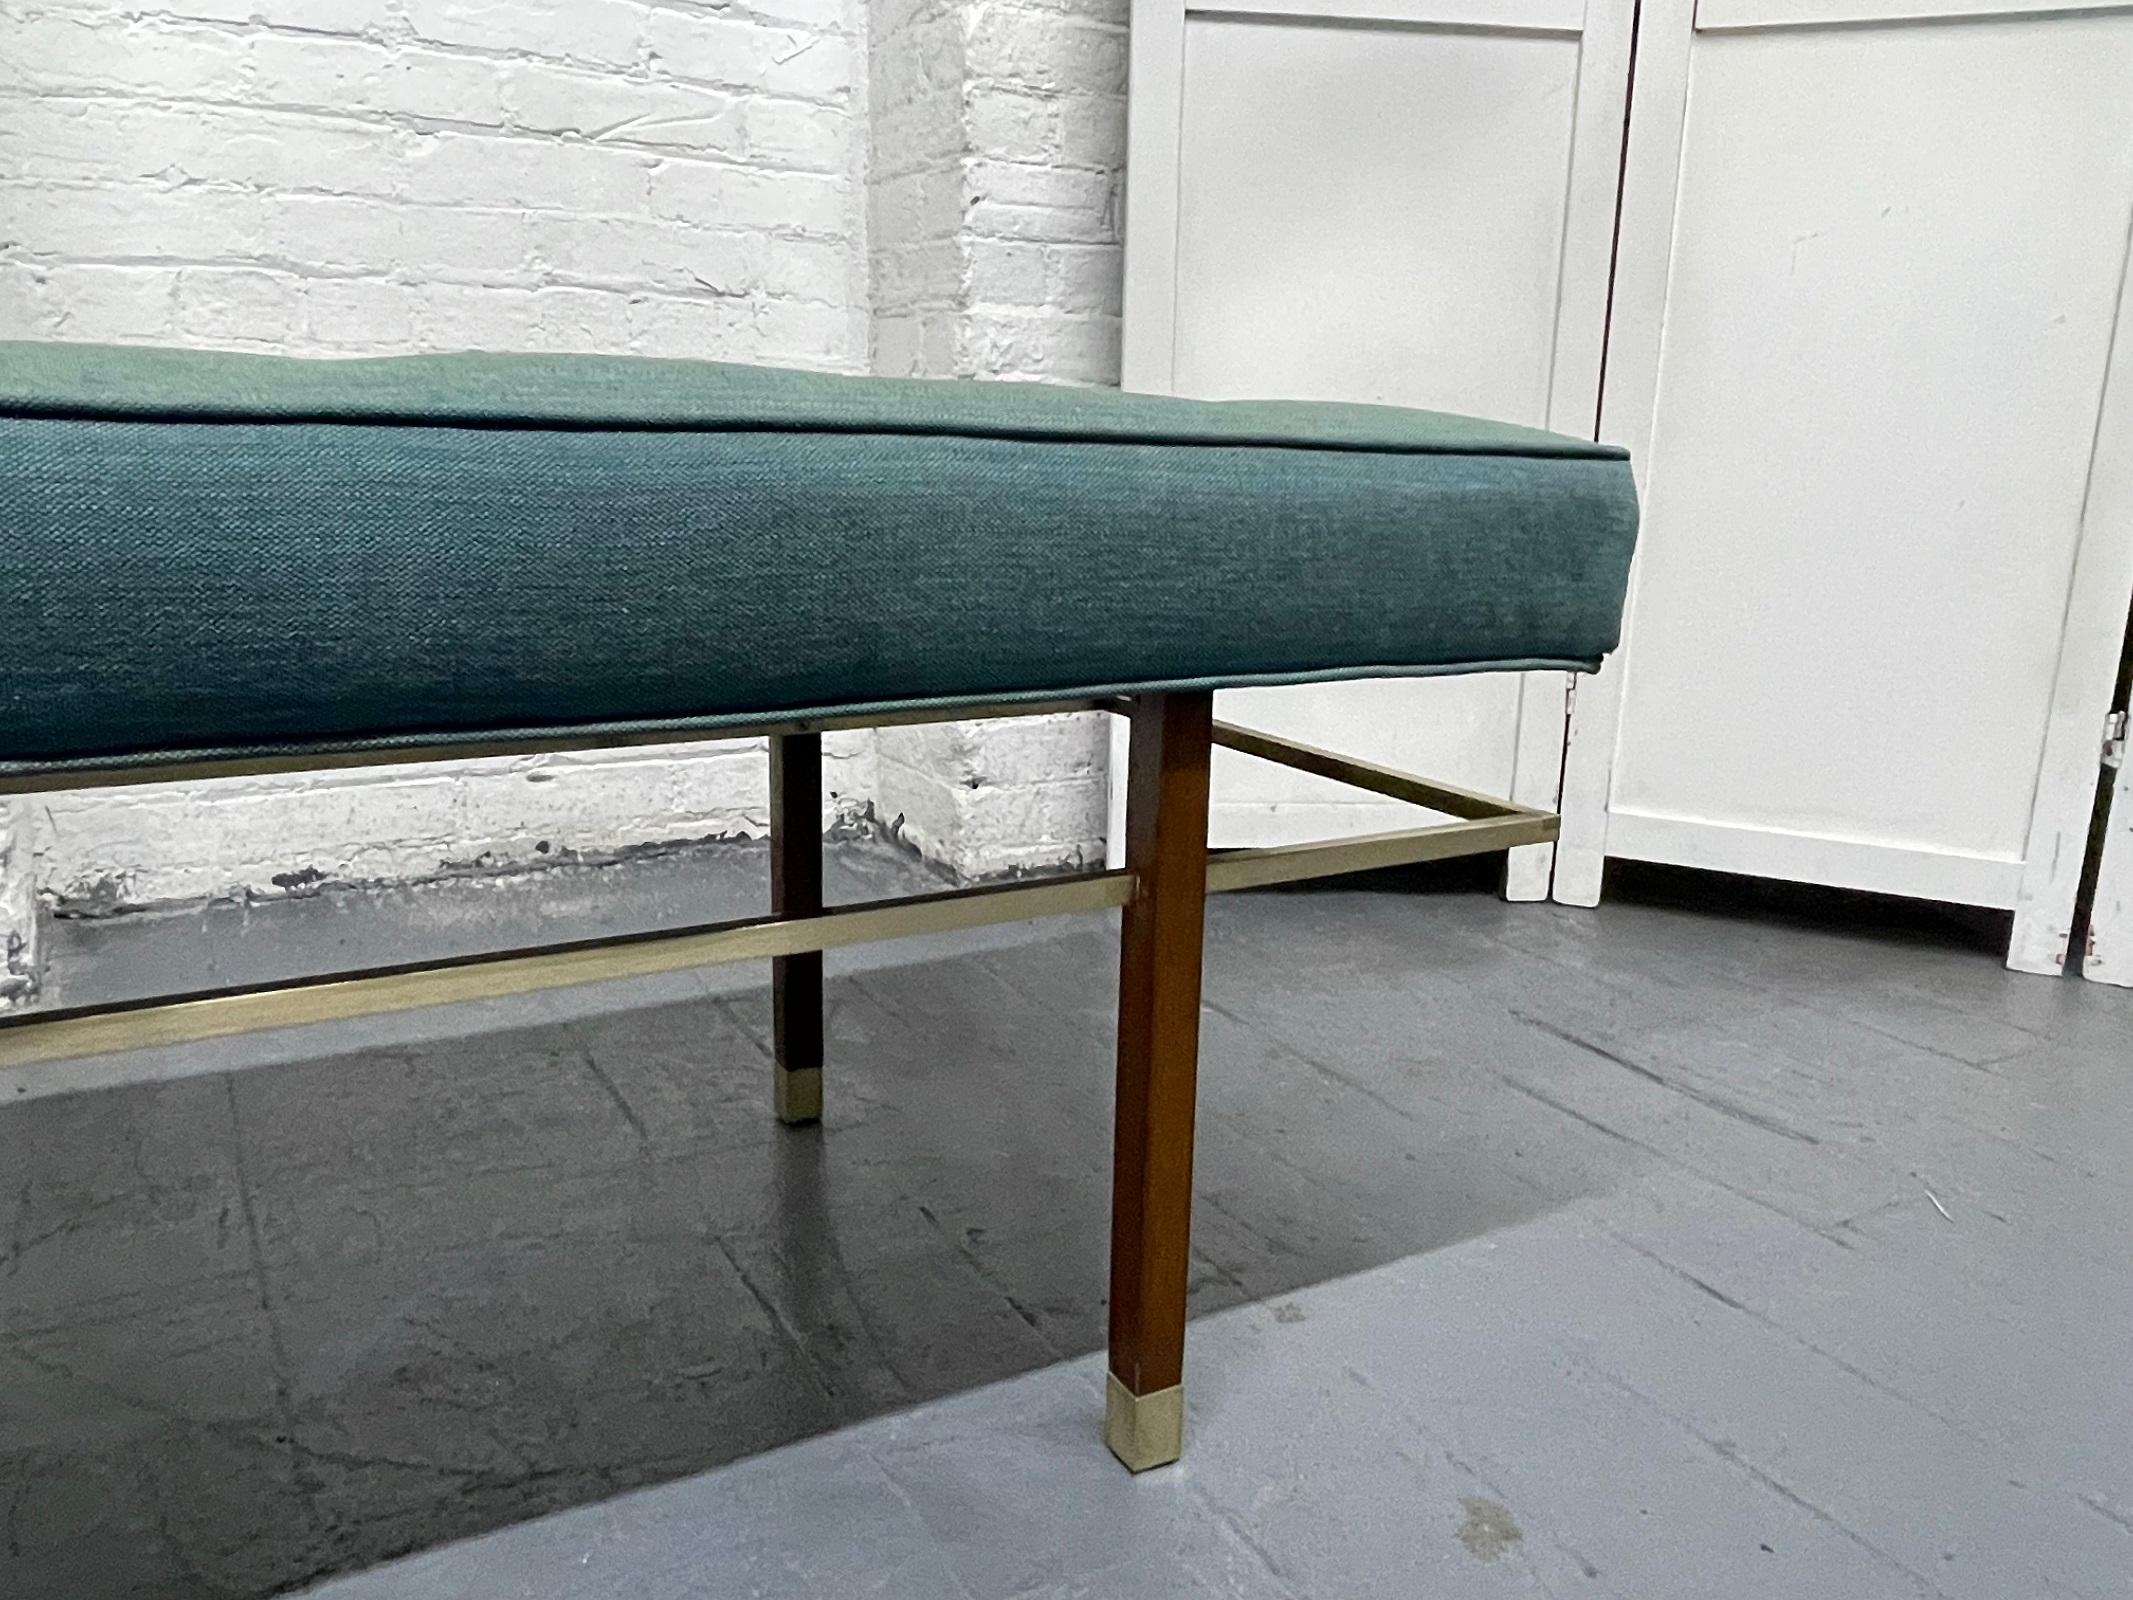 1950s Harvey Probber tufted bench. The bench has floating brass stretchers, mahogany legs and the original fabric.
As a reference, the bench is photographed in Harvey Probber catalogue, published 1950s.